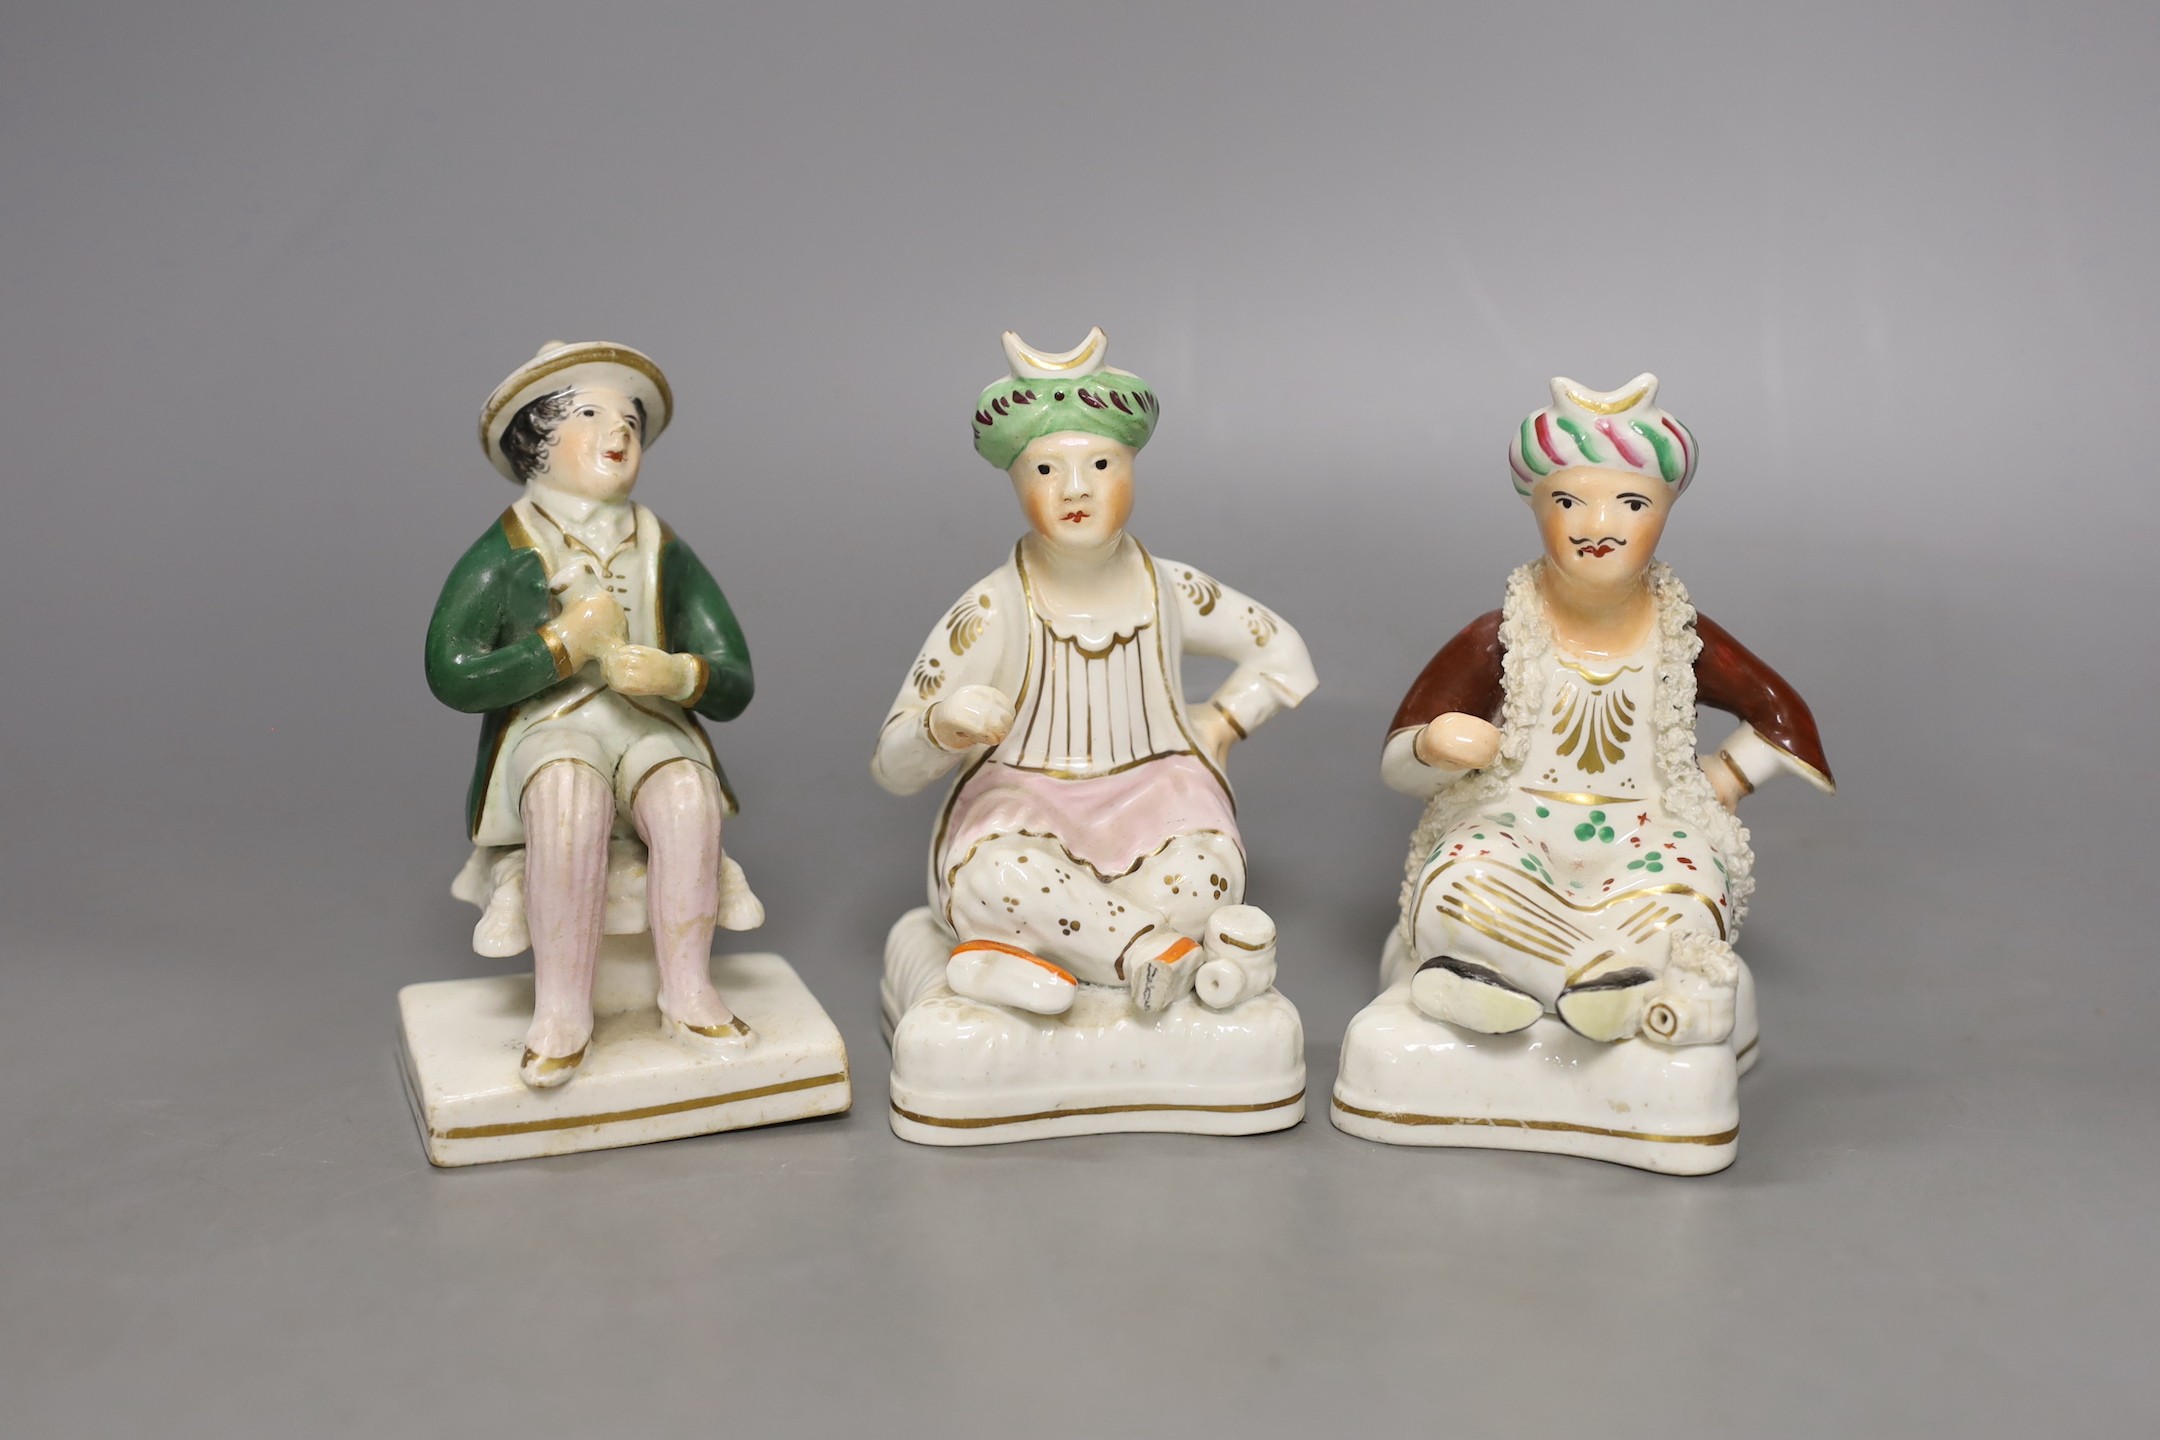 Two 19th-century Staffordshire porcellanous figures of seated Ottoman Turks and a seated figure of a man possibly by Alcock - 12cm tall